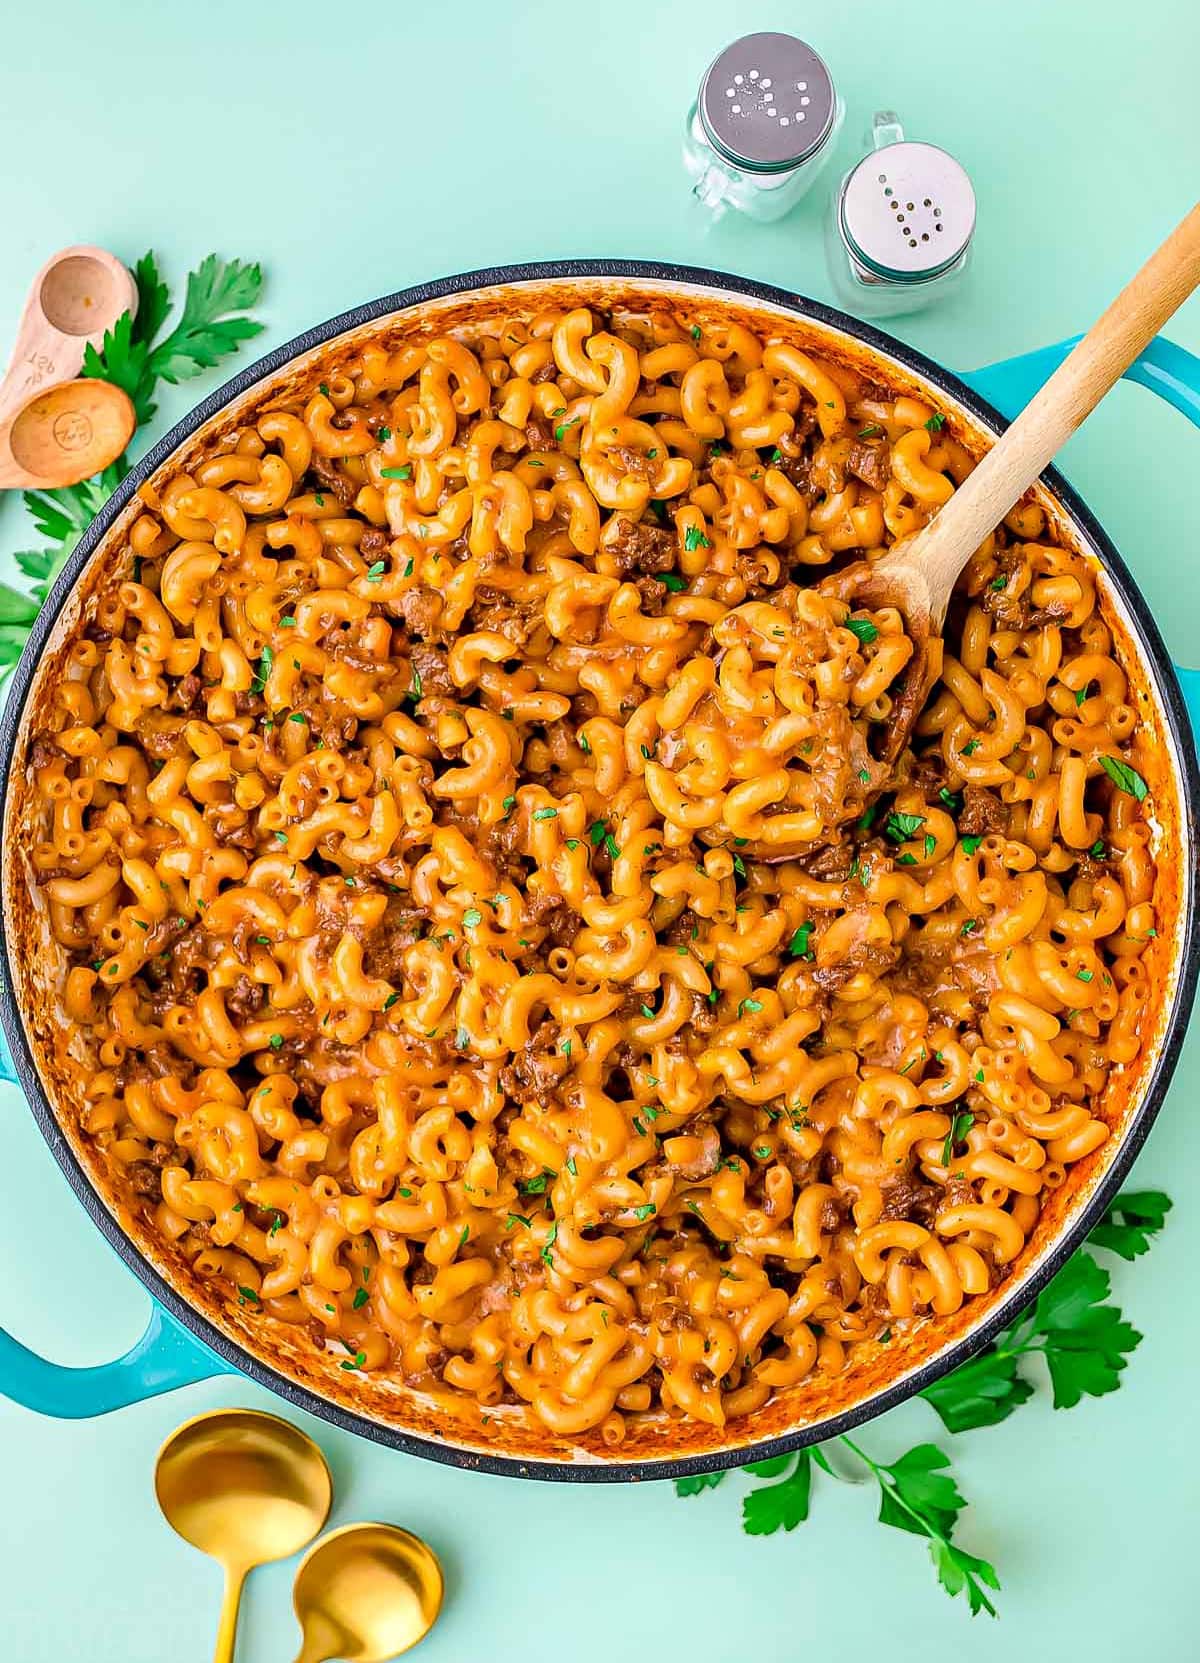 skillet of homemade hamburger helper garnished with chopped fresh parsley. background is light aqua colored.